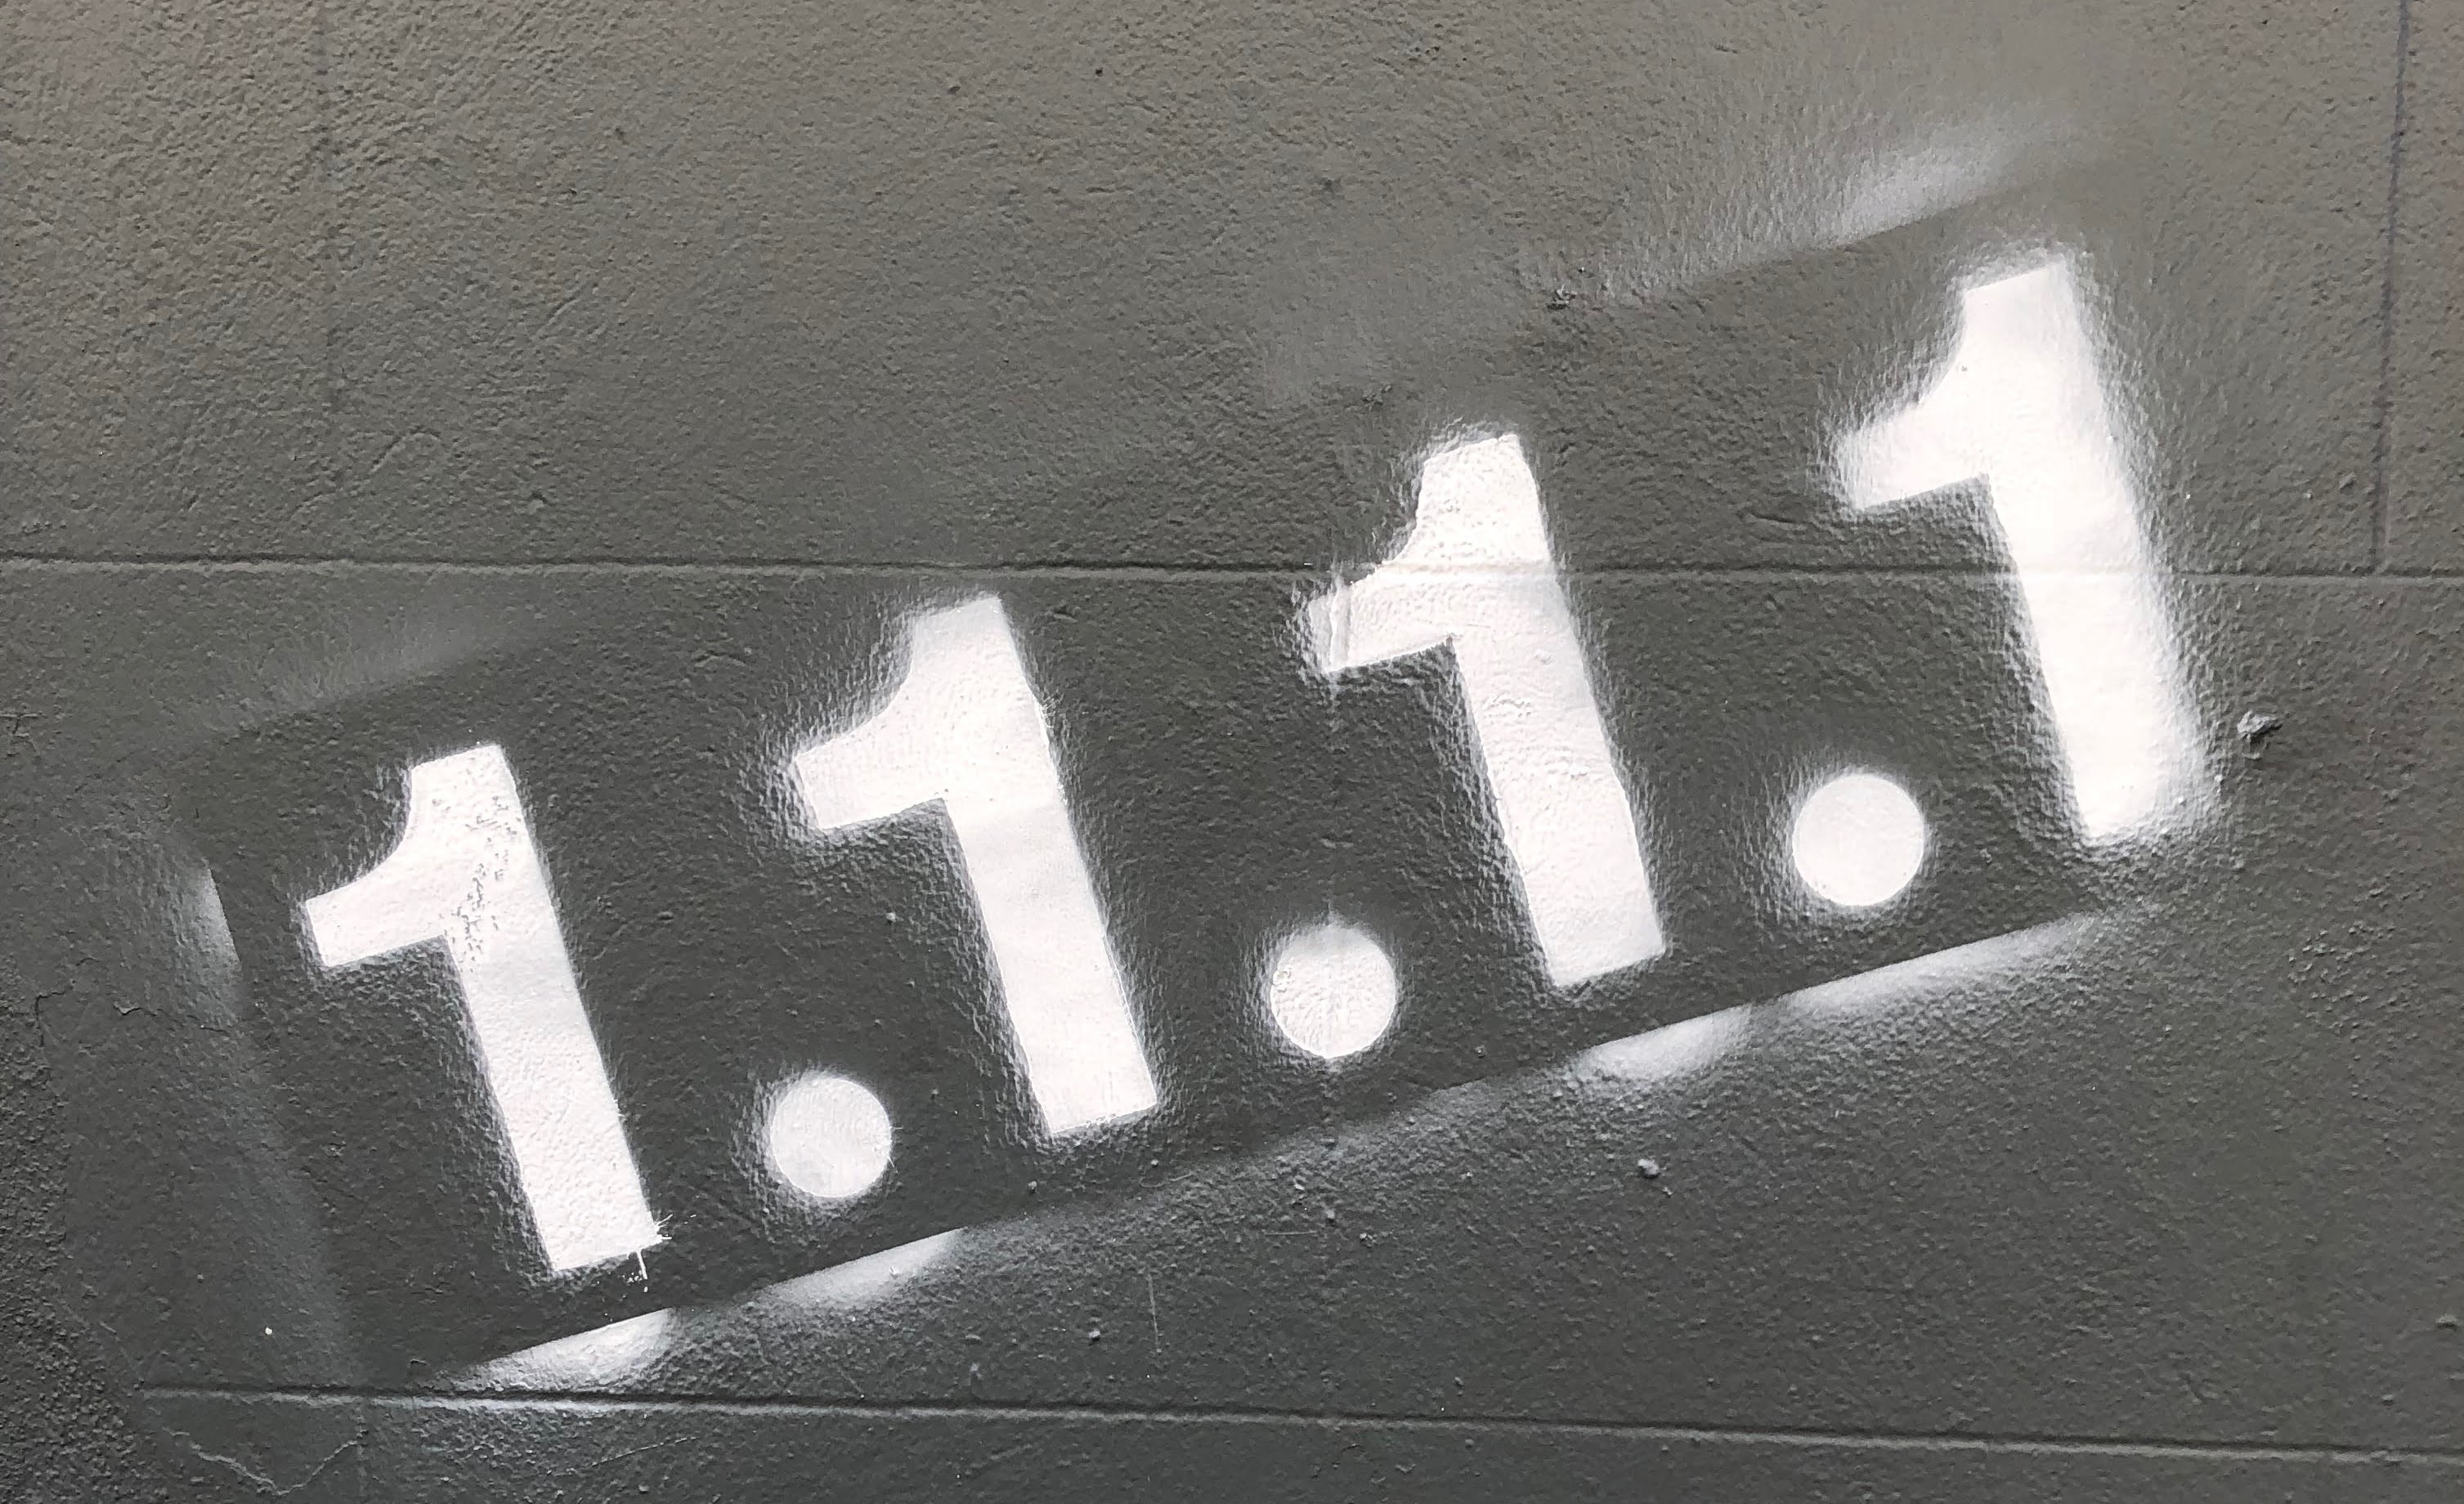 Cloudflare's 1.1.1.1 app makes web browsing faster and safer.